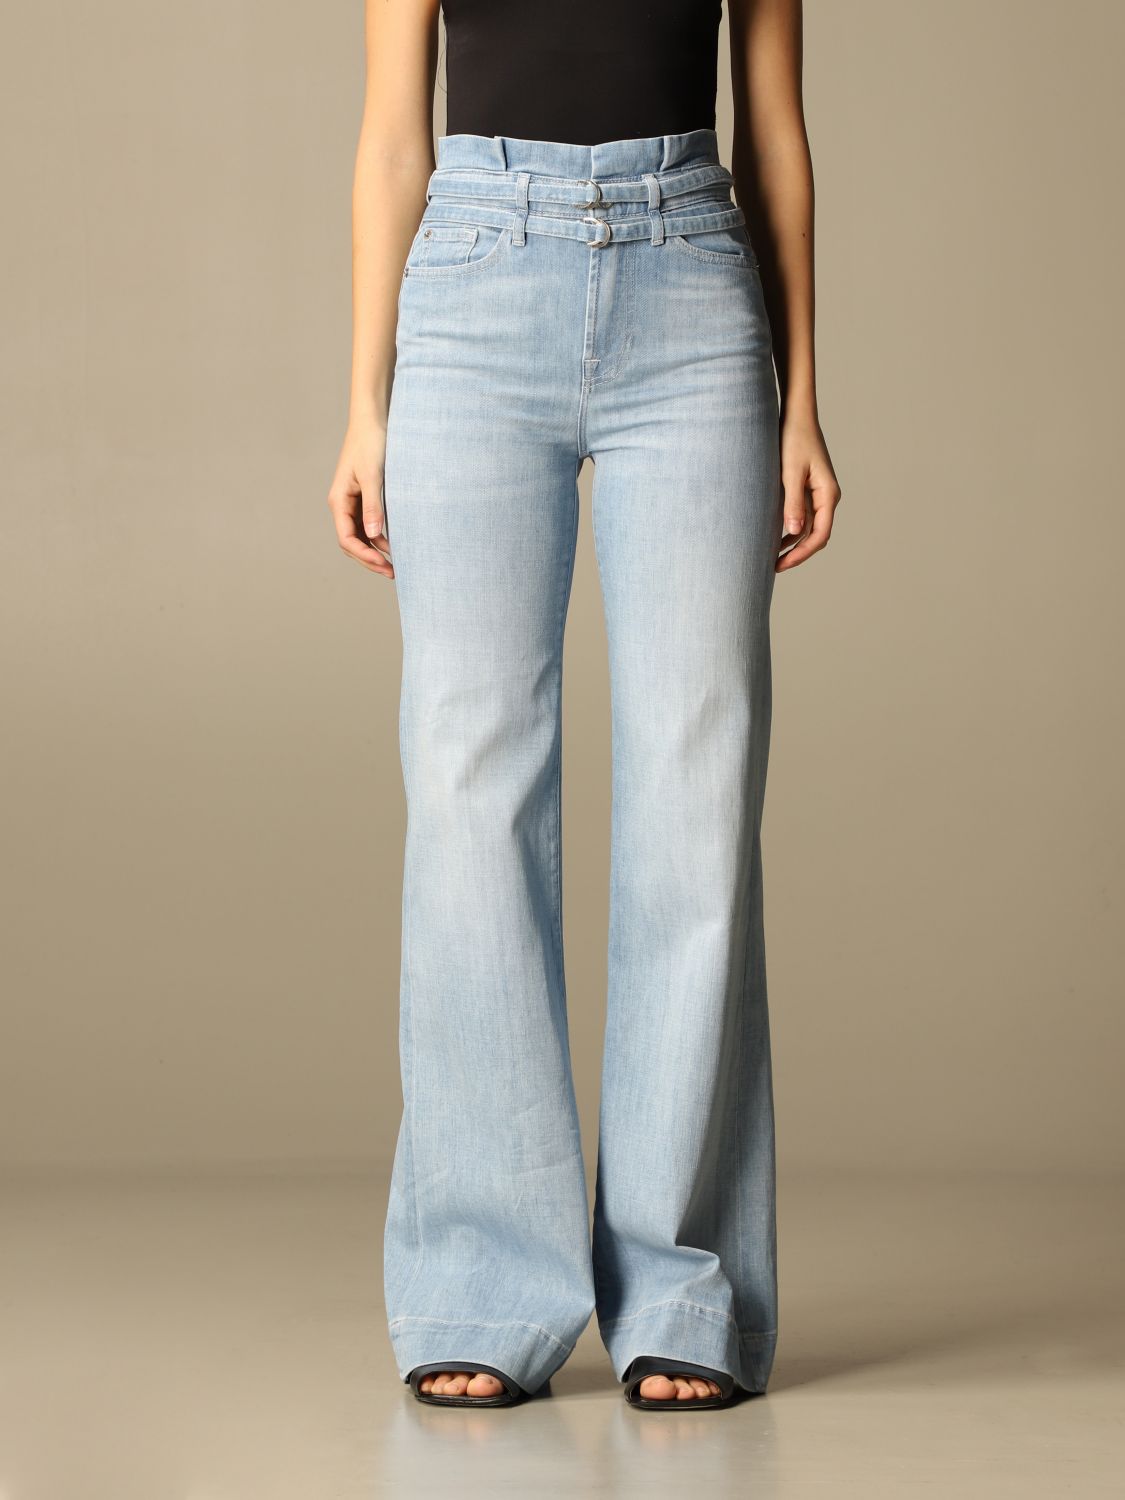 7 FOR ALL MANKIND: jeans in high-waisted denim | Jeans For All Mankind Denim | Jeans 7 For All Mankind JSWDR510RN